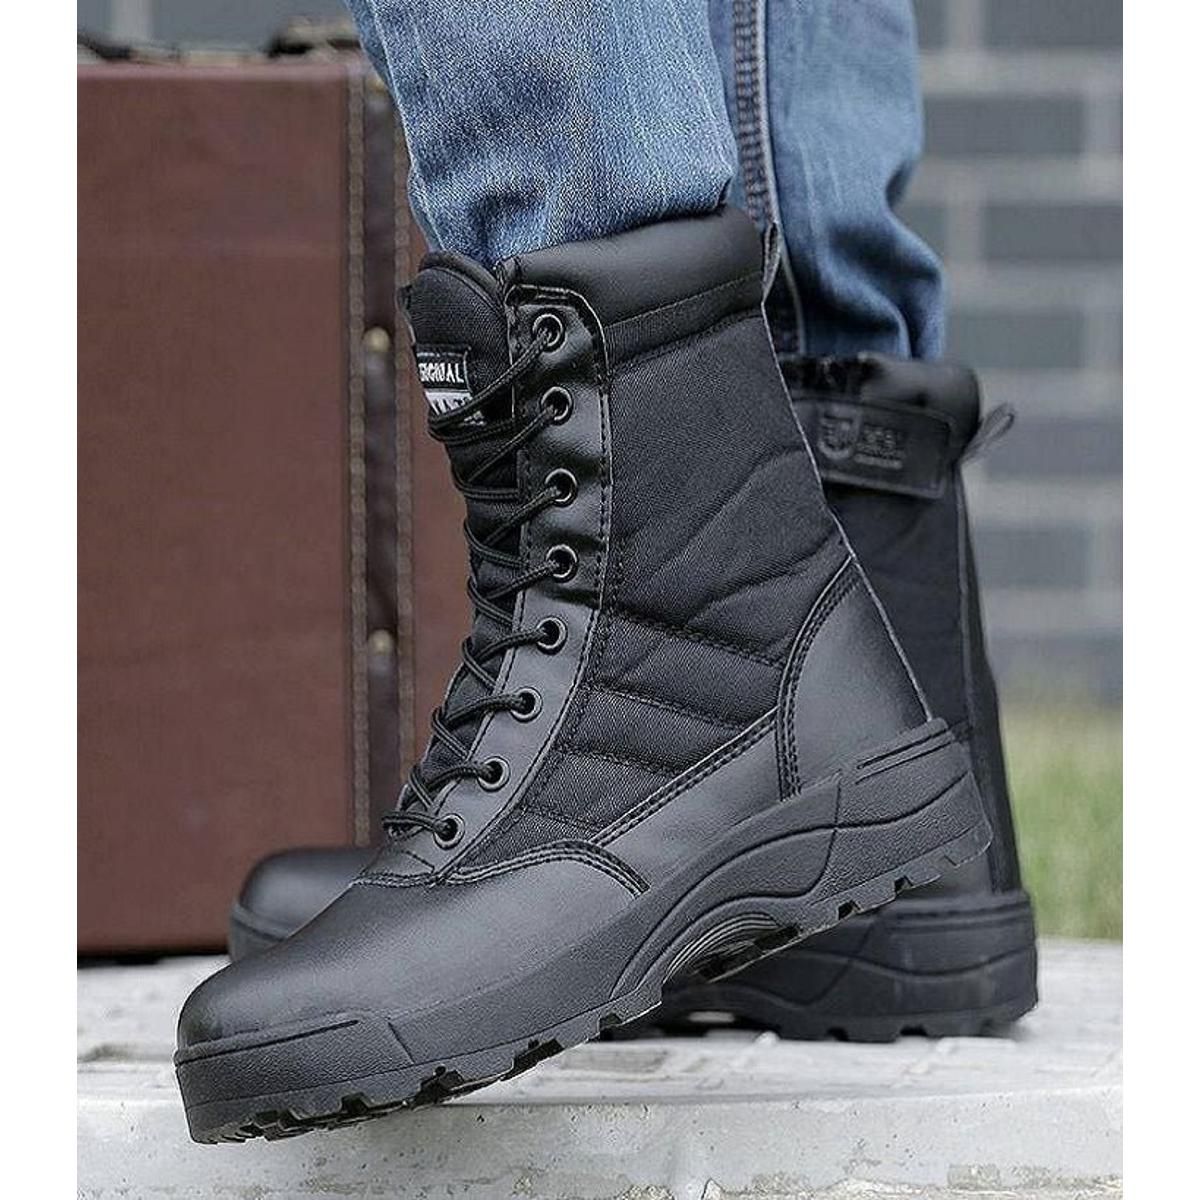 Buy SWAT HIKING BOOTS FOR MEN'S at Lowest Price in Pakistan | Oshi.pk